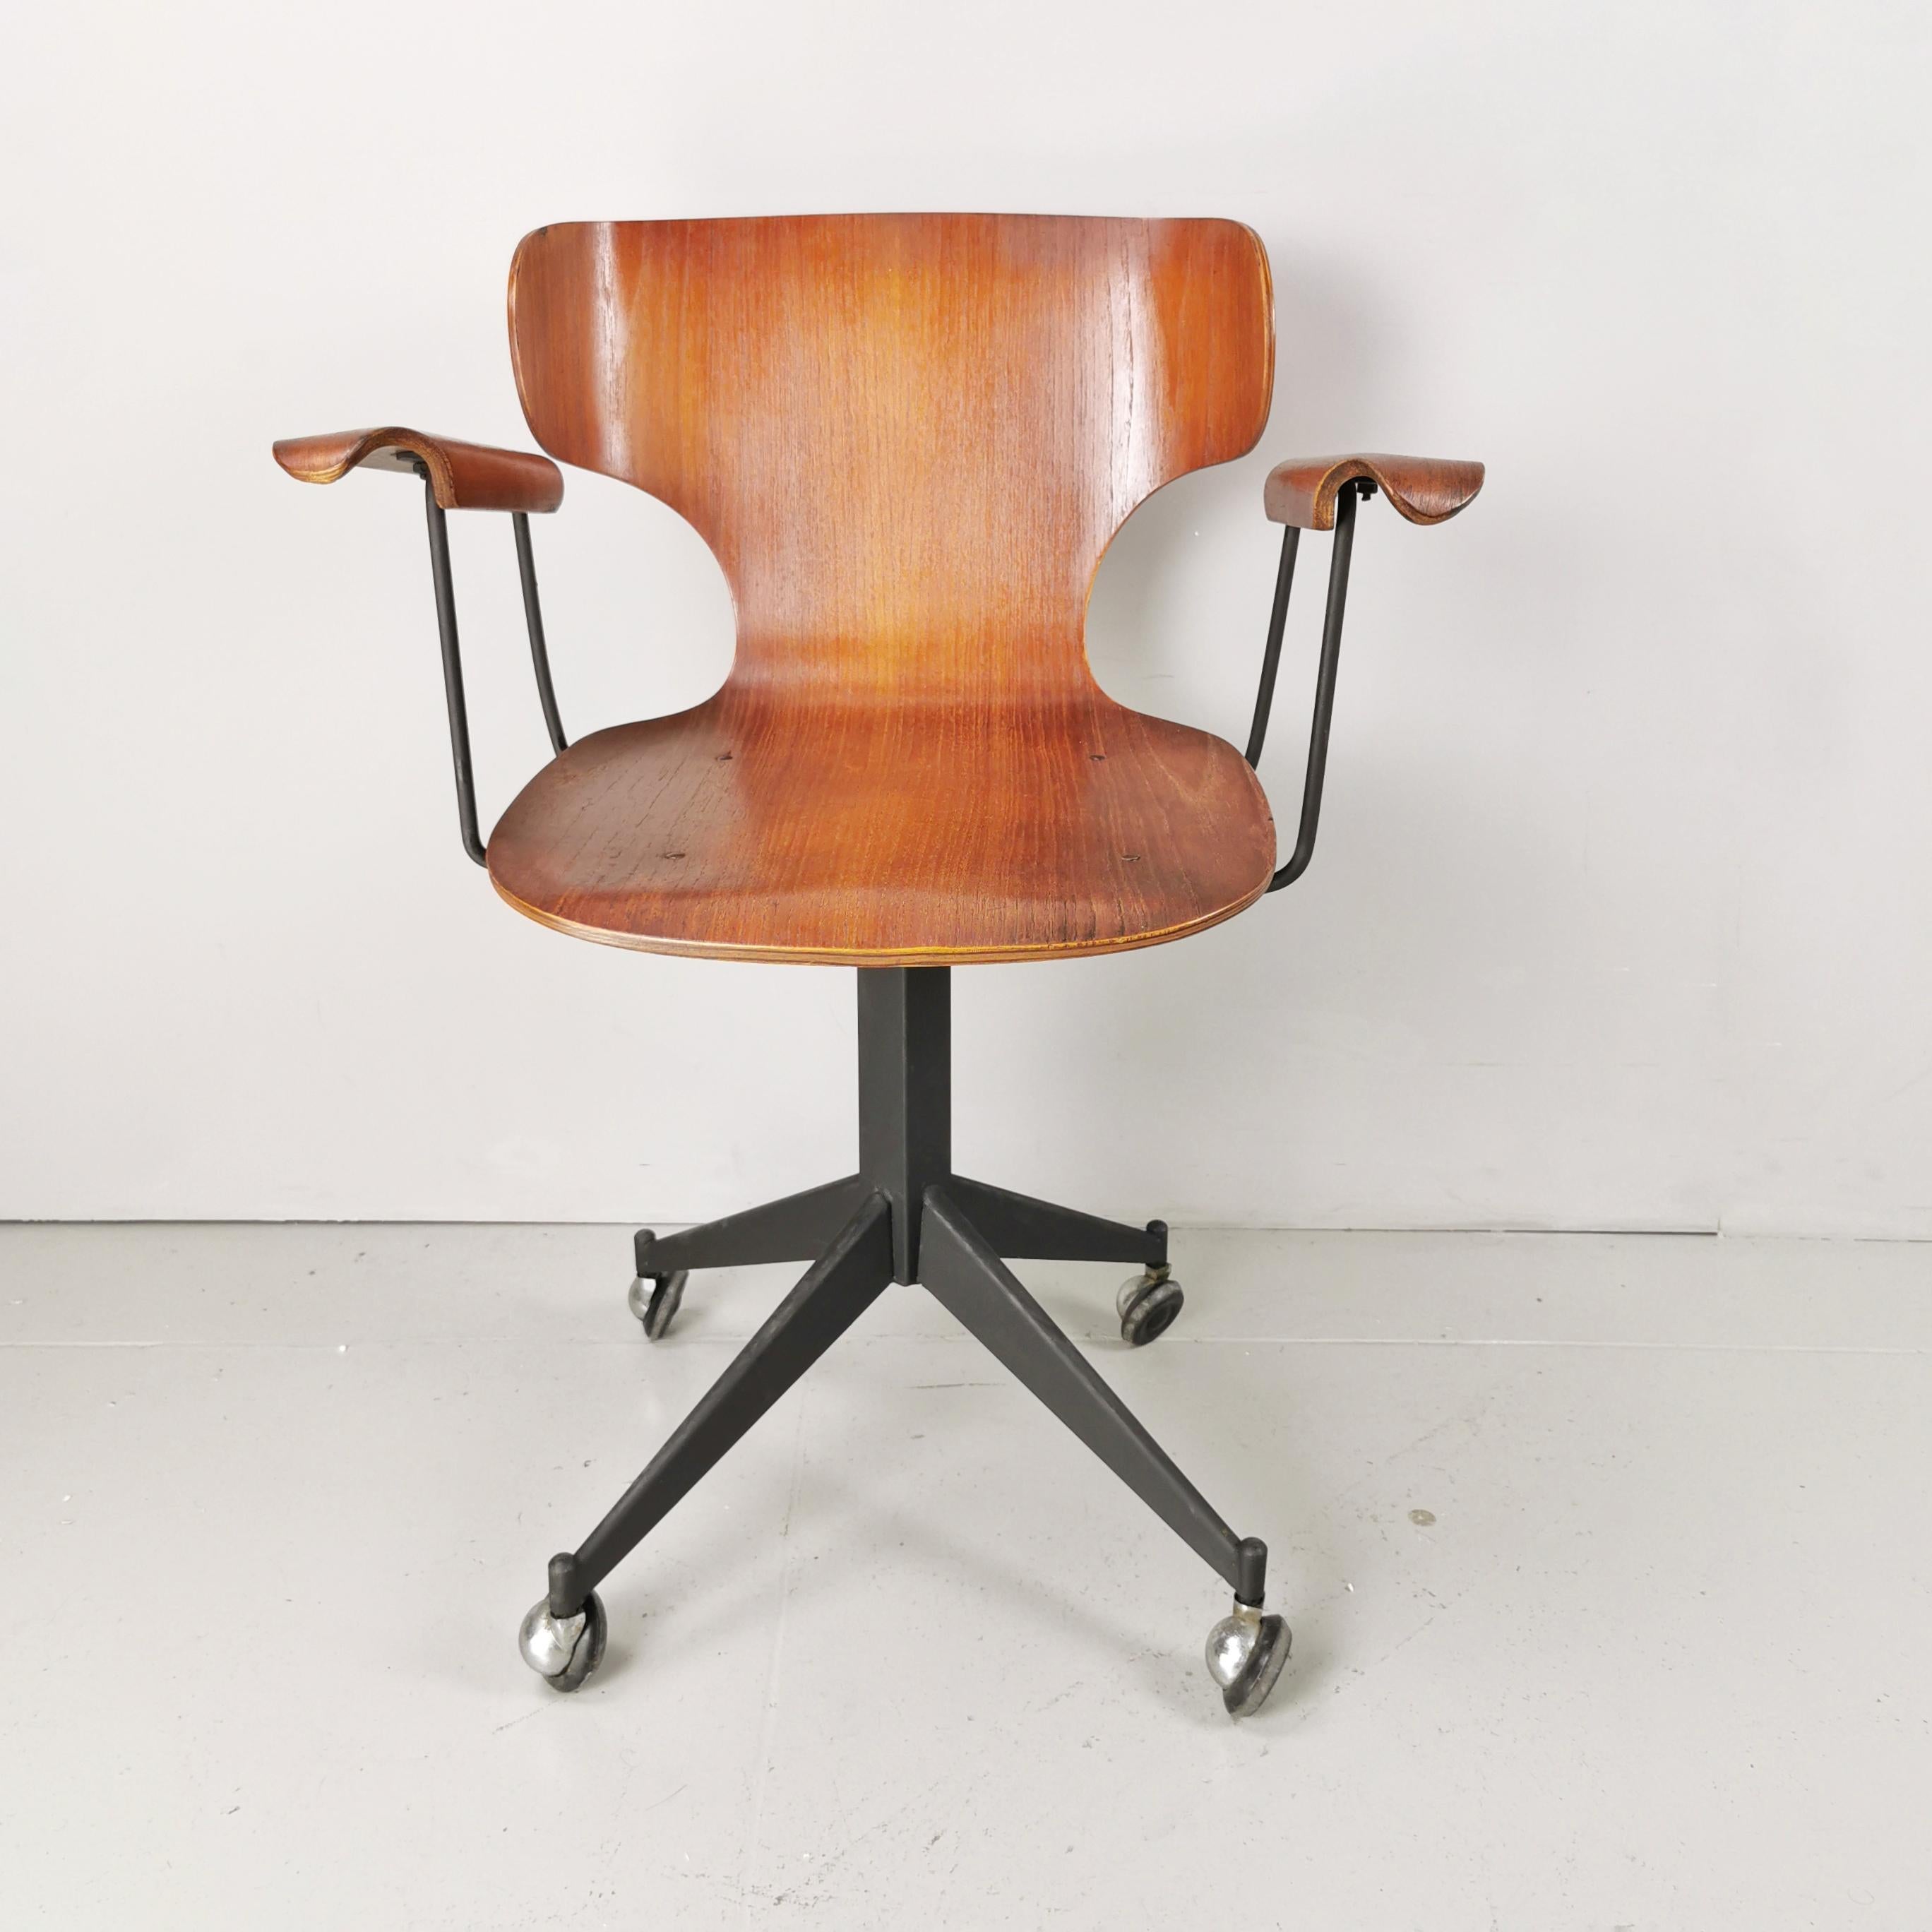 Mid-Century Modern rare 50s/60s curved wood chair office desk For Sale